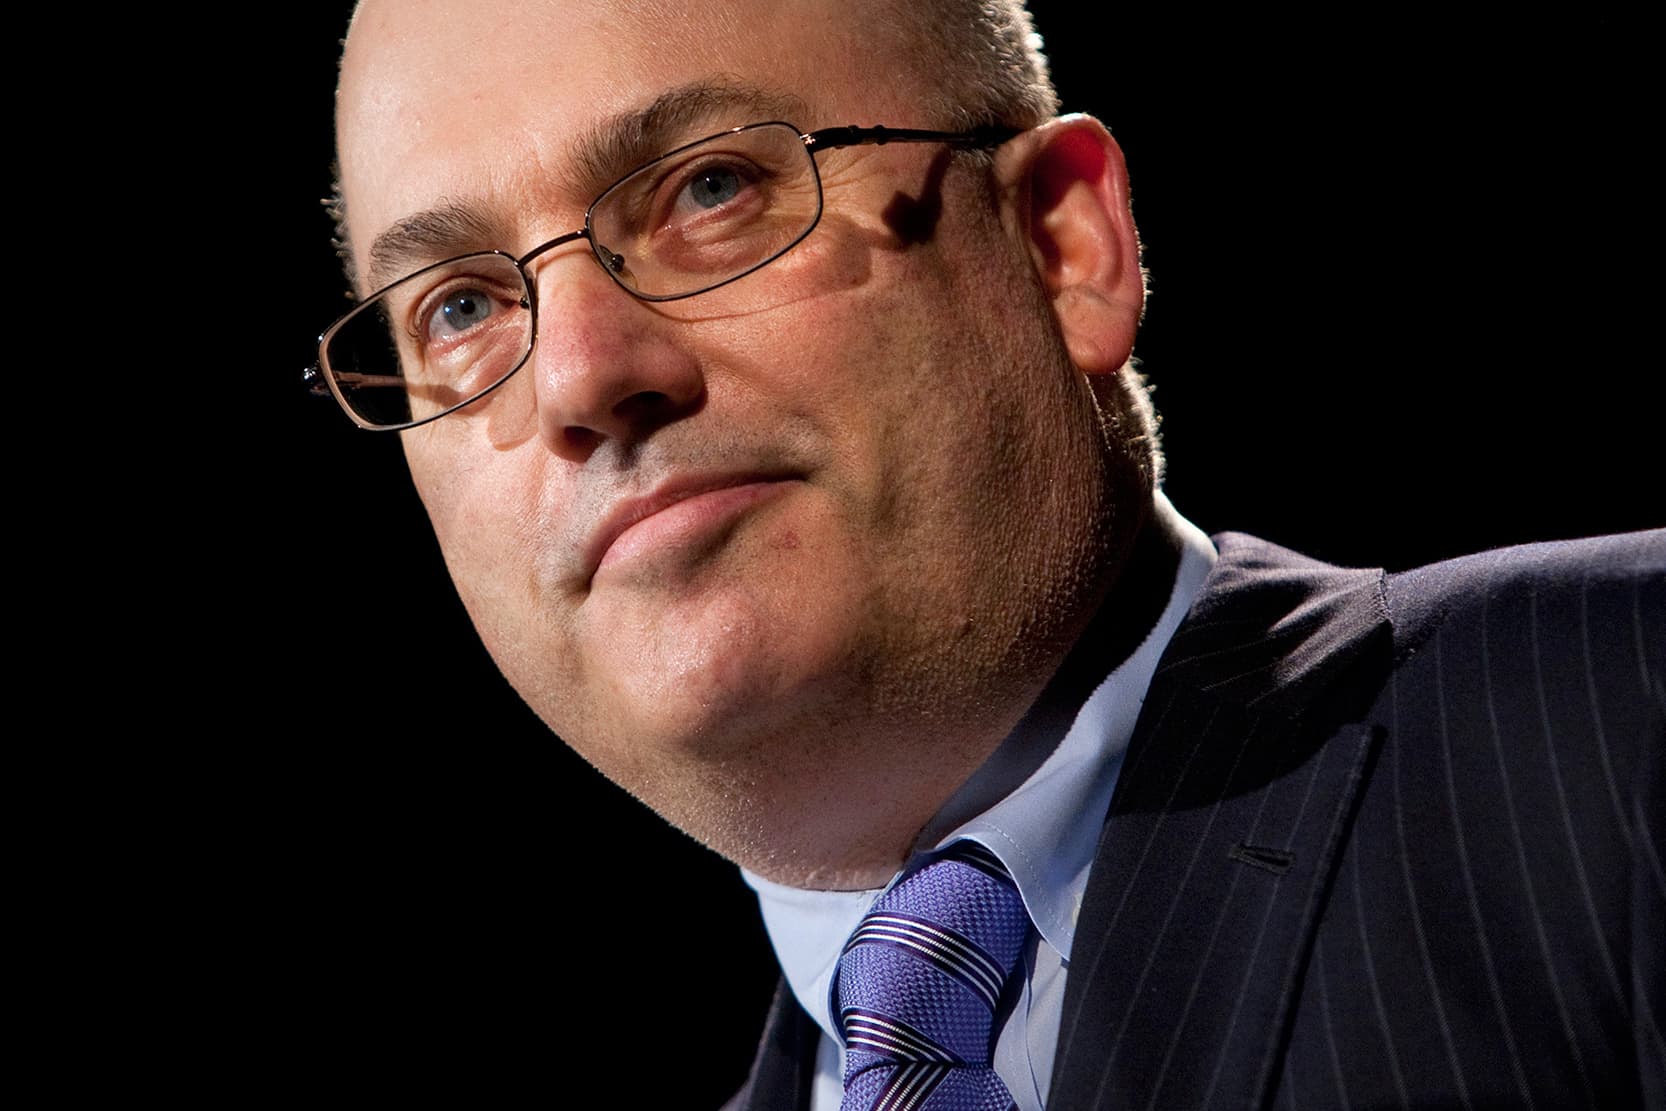 Steve Cohen, founder of Point72, leaves Twitter after family receives threats